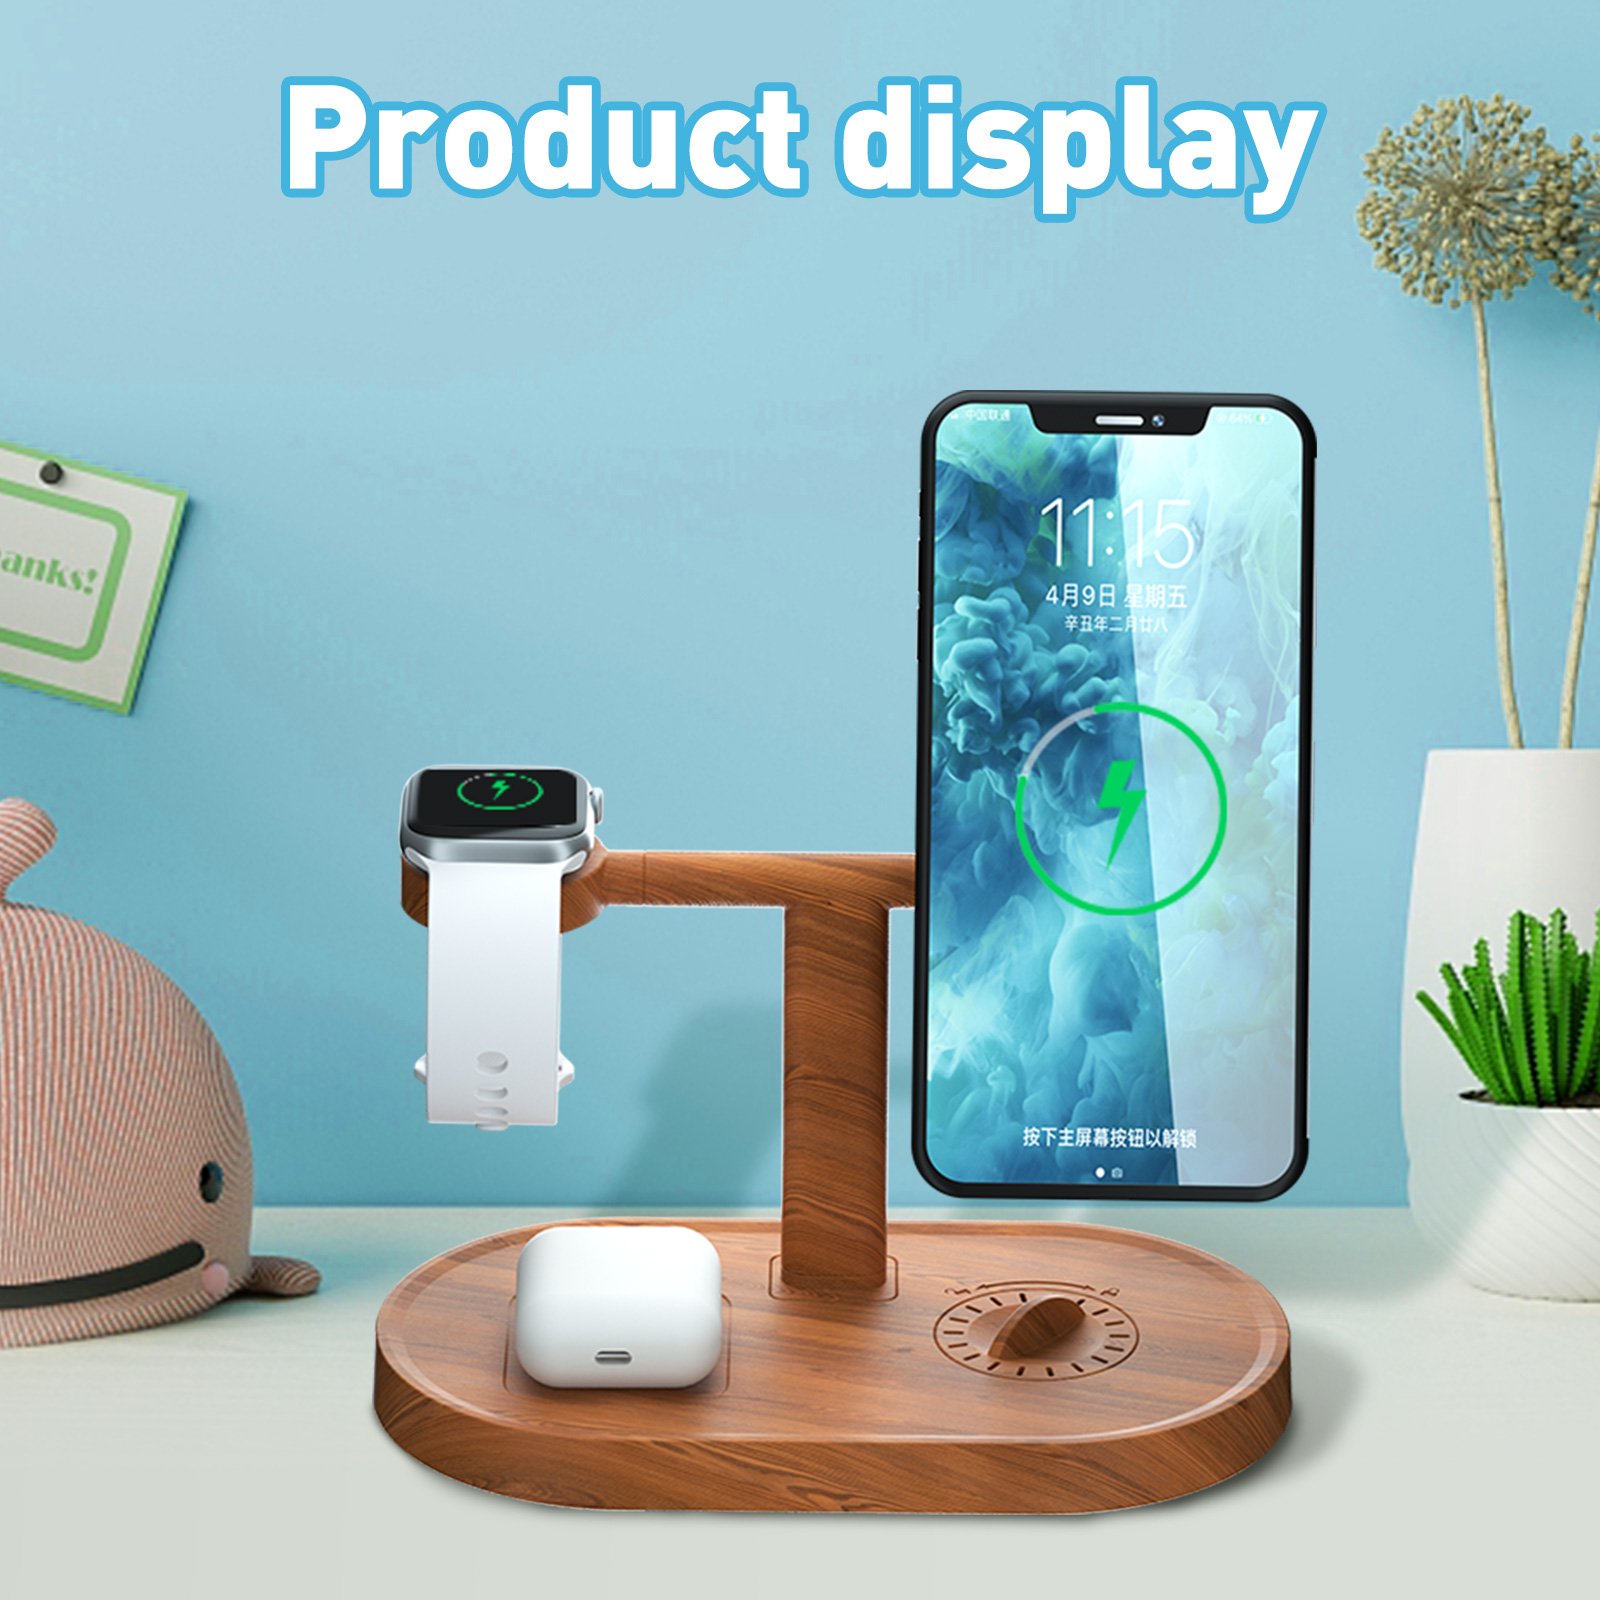 SMOIVE 3 in 1 Wireless Qi Fast Charger Dock Stand for iPhone 12 And Above &AirPods 2 and above & Apple Watch (Wood Color) - image 6 of 8